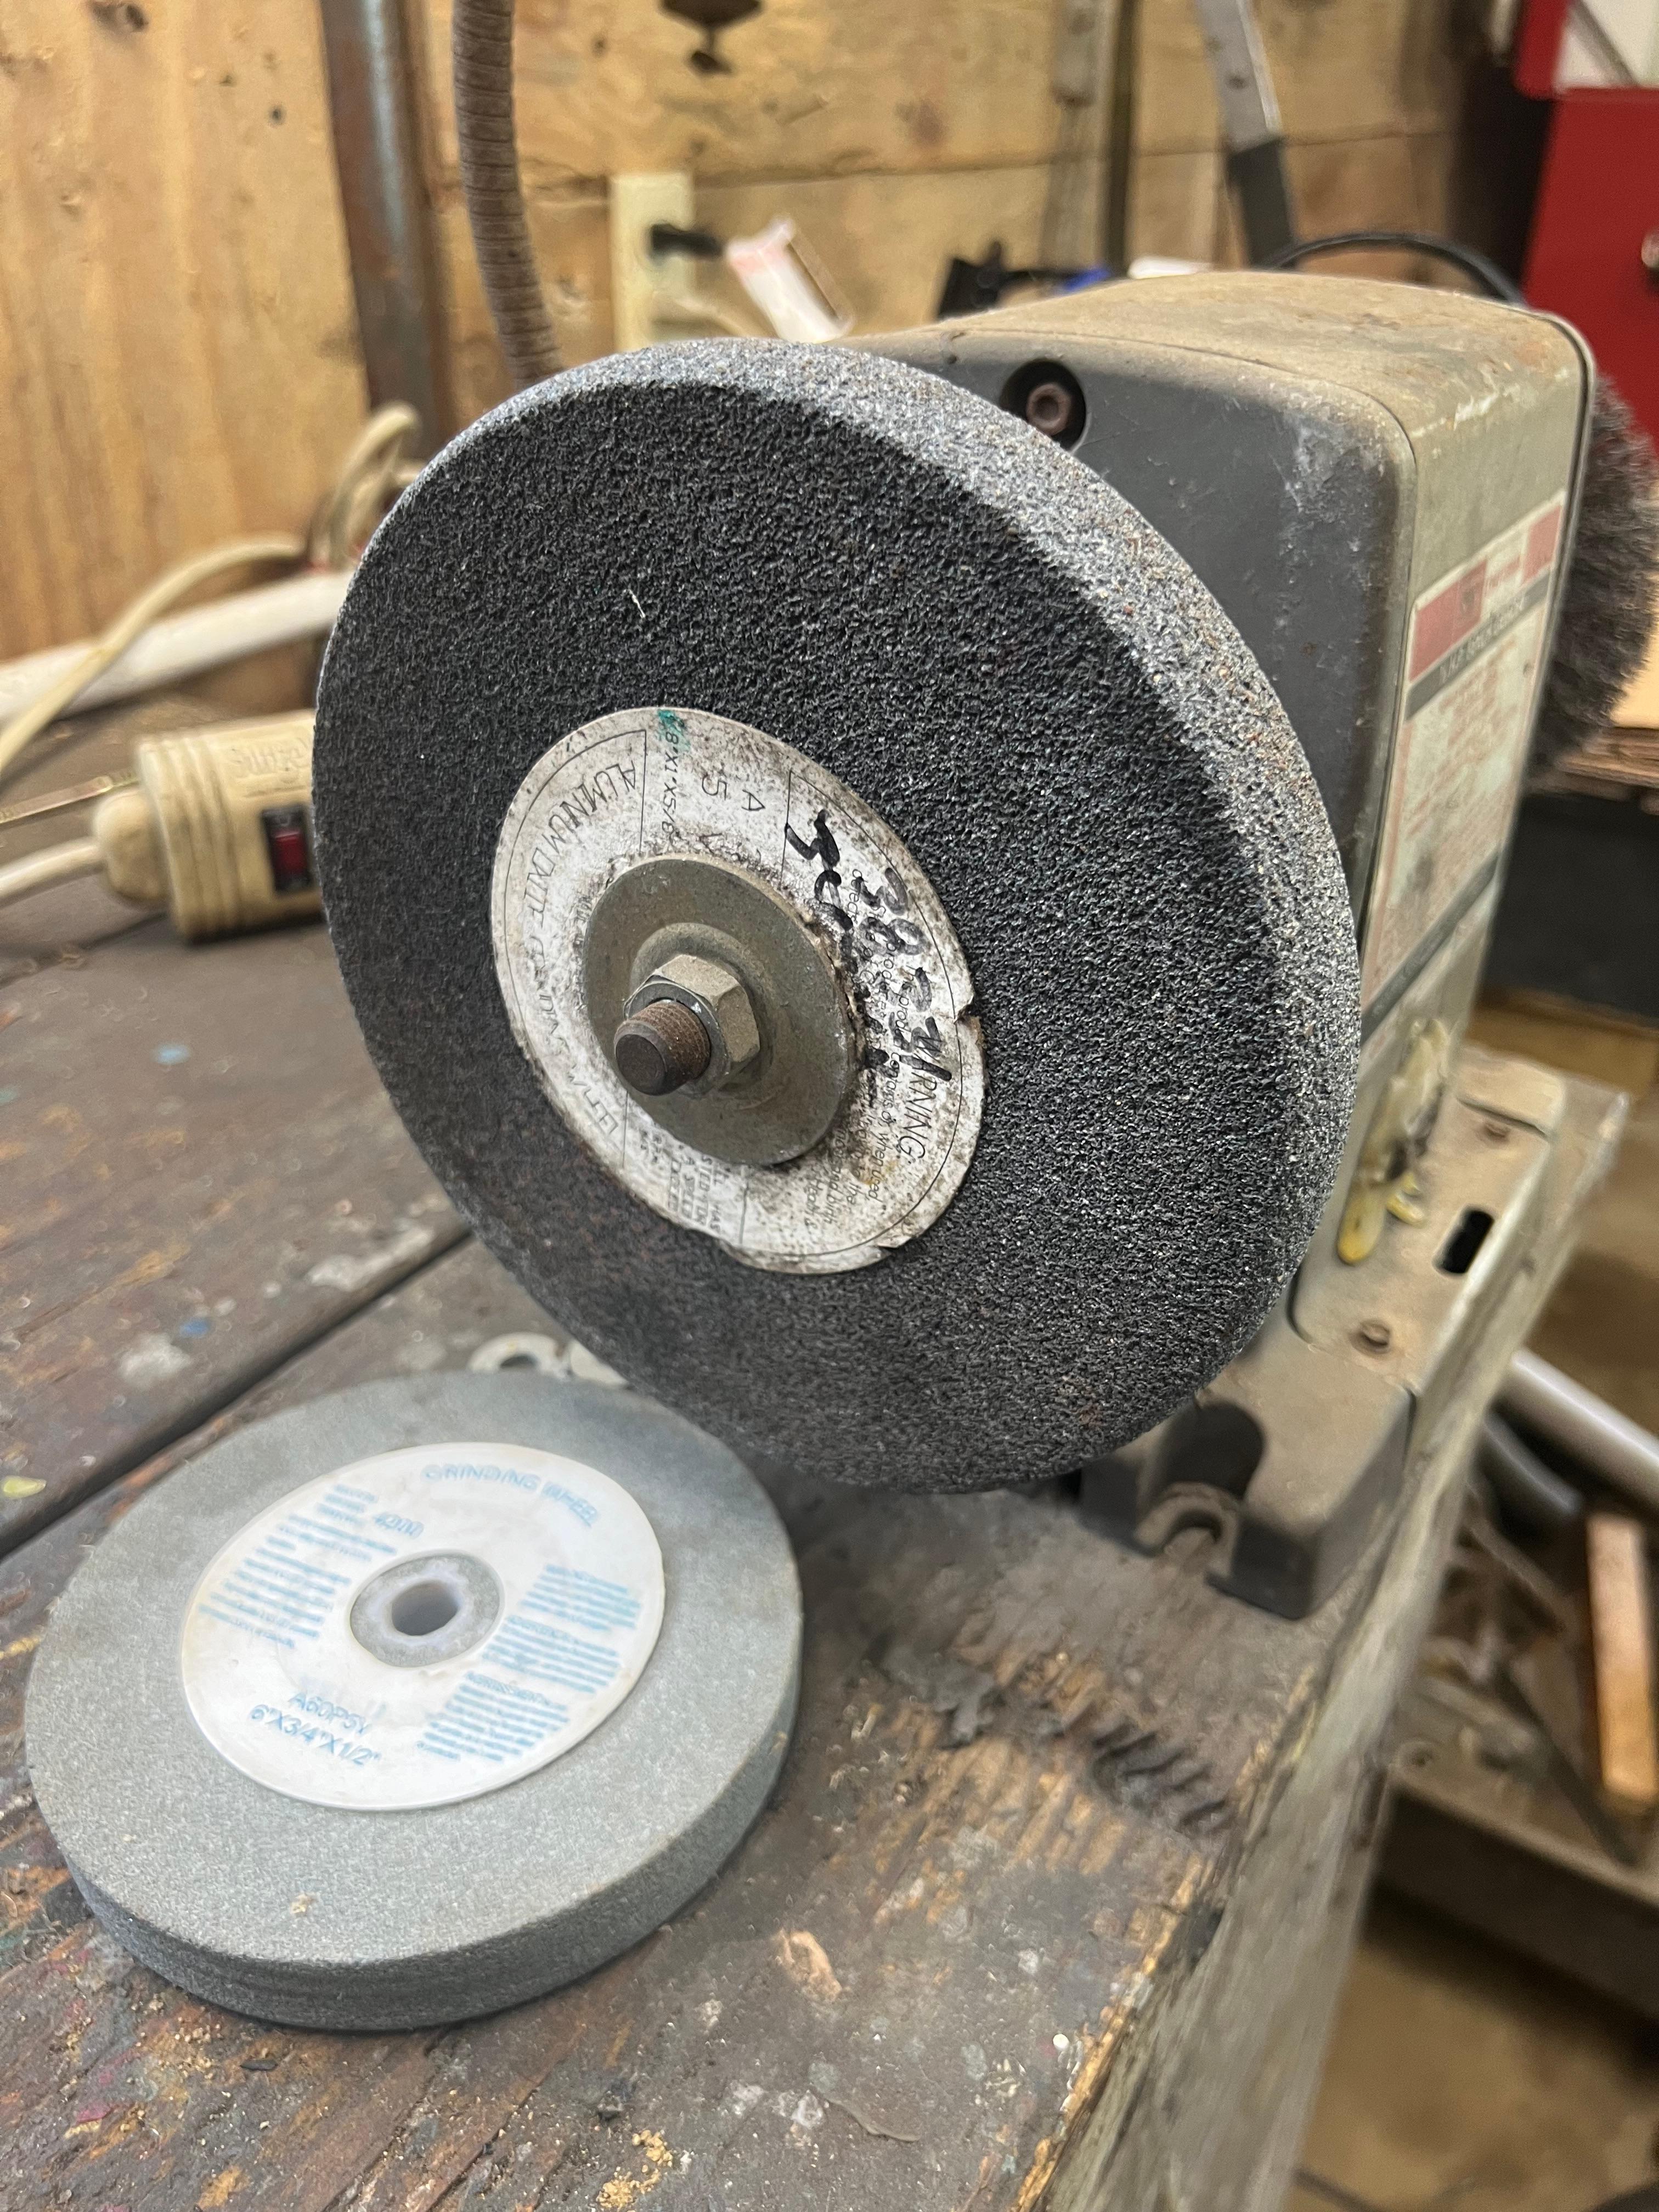 Record 3VS Vice & Craftsman 1/2hp Bench Grinder on a 28” x 58” Rolling Cabinet